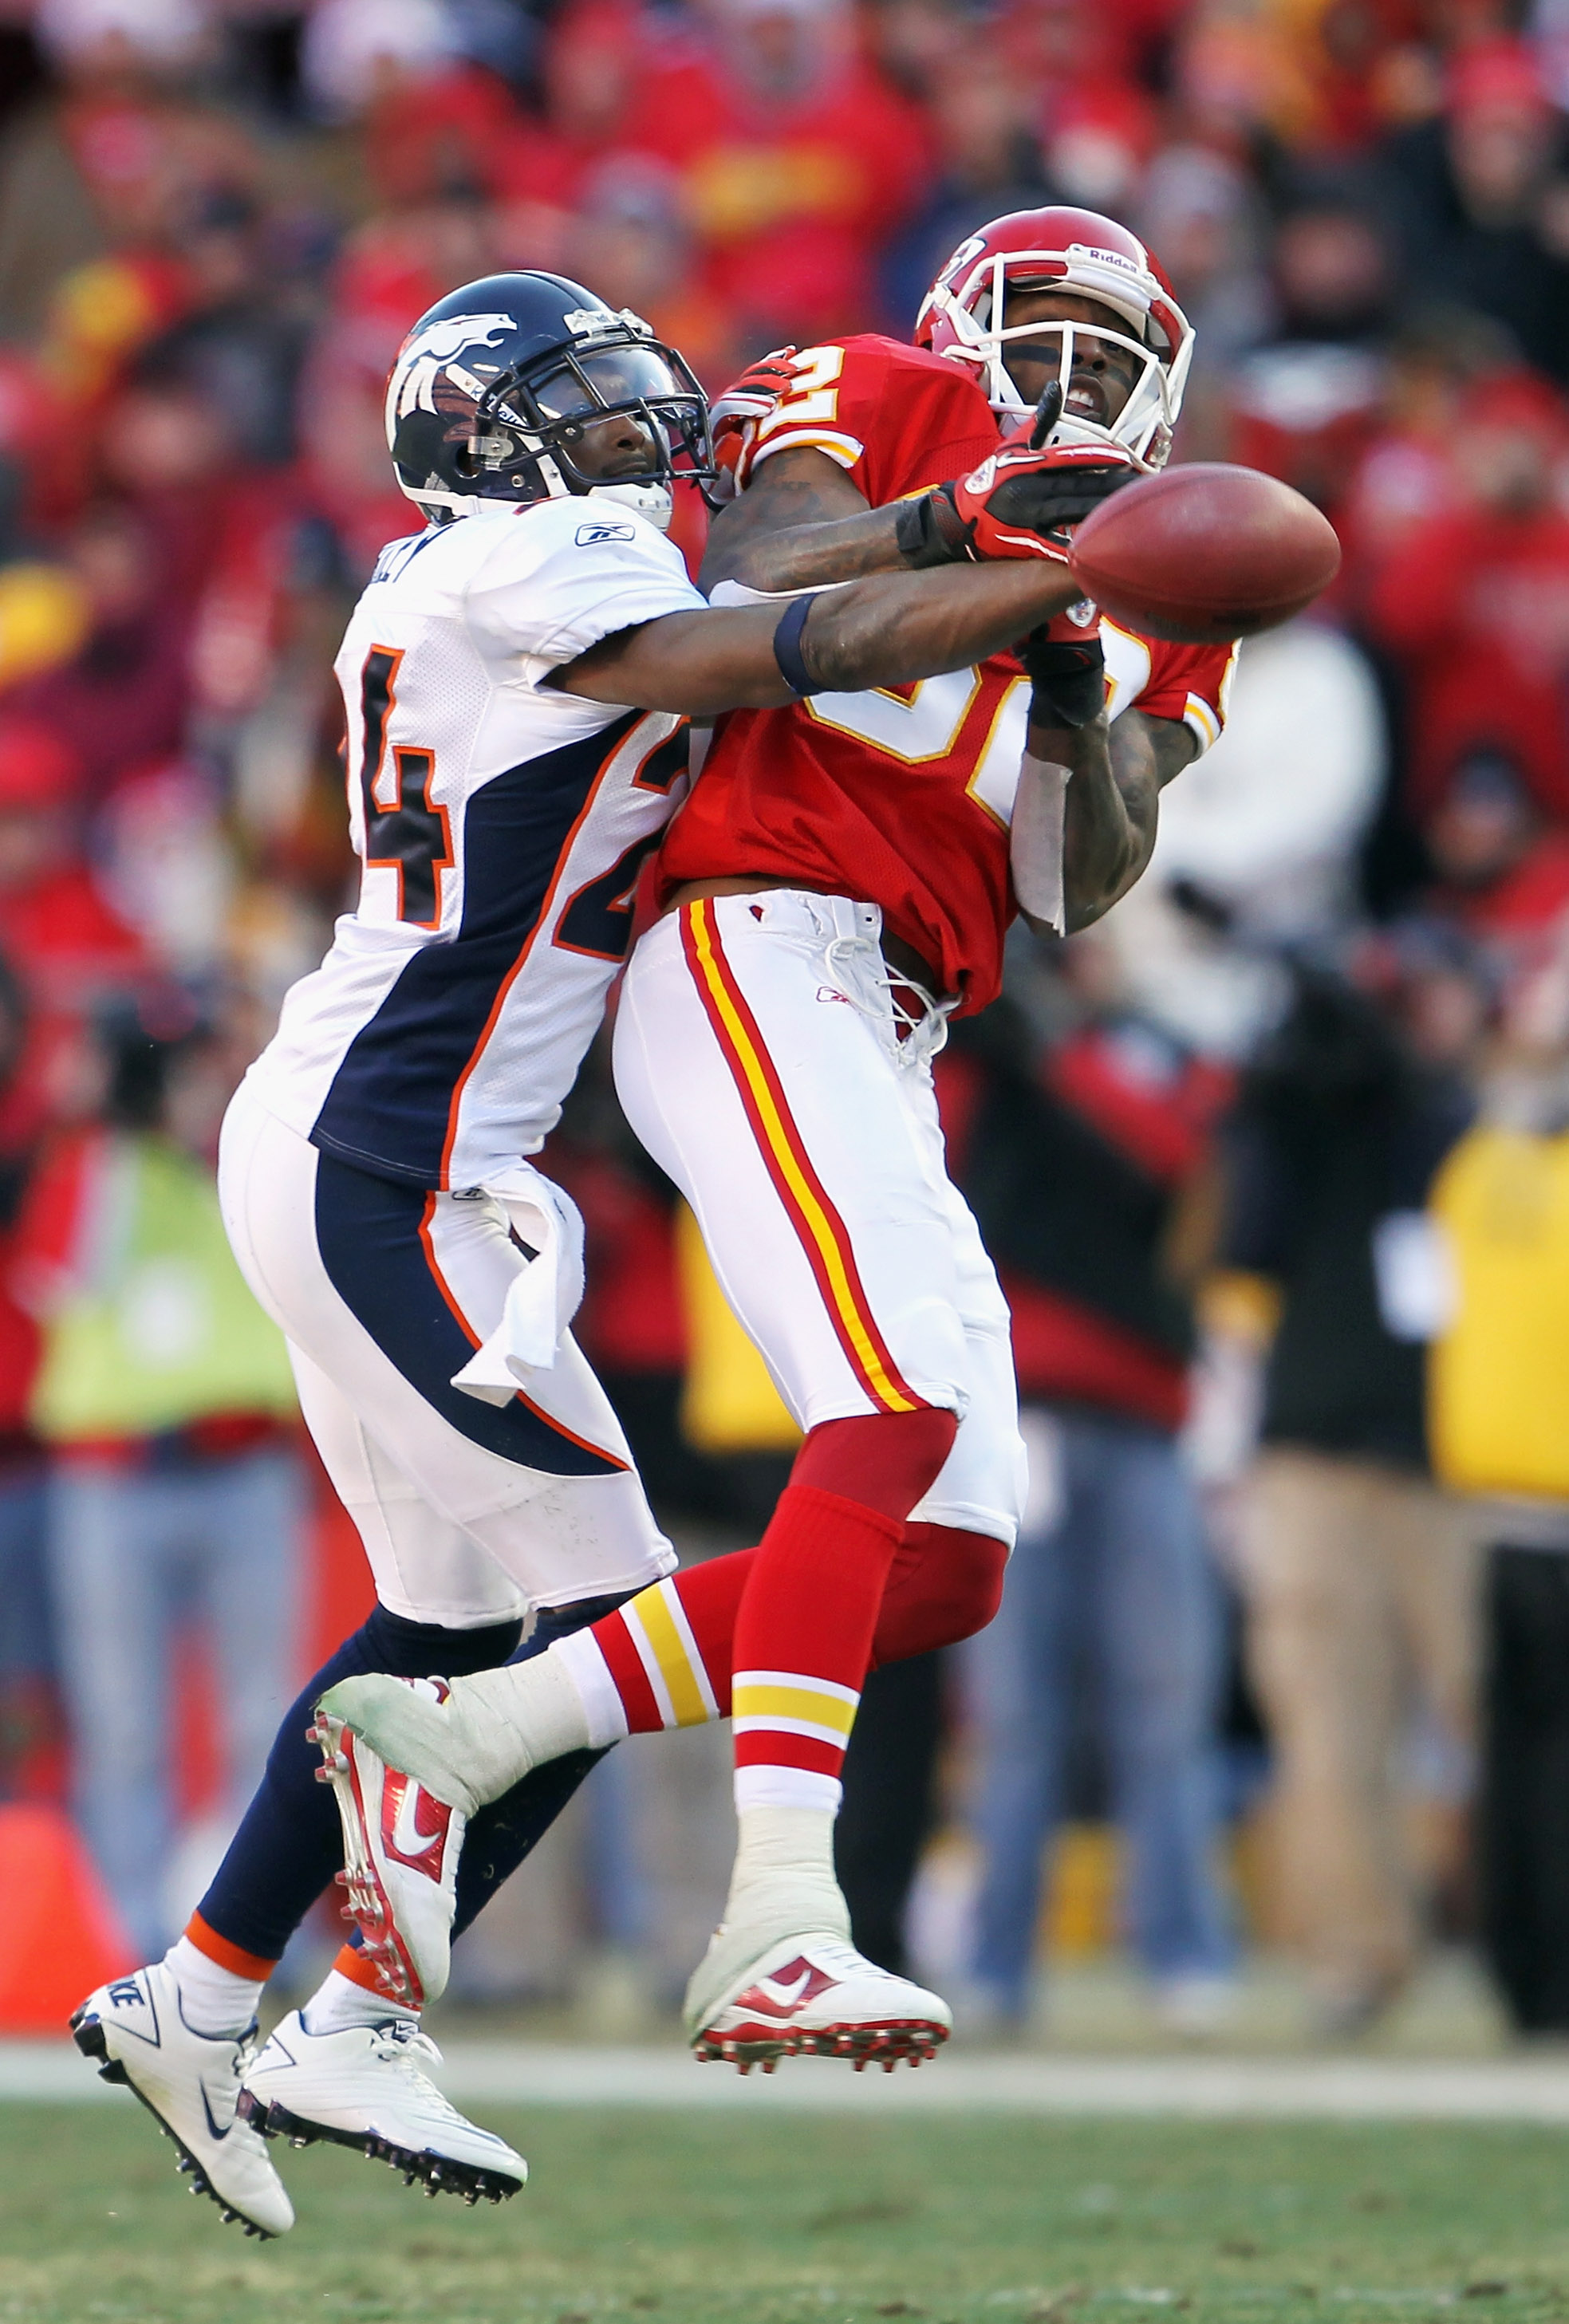 KANSAS CITY, MO - DECEMBER 05:  Champ Bailey #24 of the Denver Broncos breaks up a pass intended for Dwayne Bowe #82 of the Kansas City Chiefs during the game on December 5, 2010 at Arrowhead Stadium in Kansas City, Missouri.  (Photo by Jamie Squire/Getty